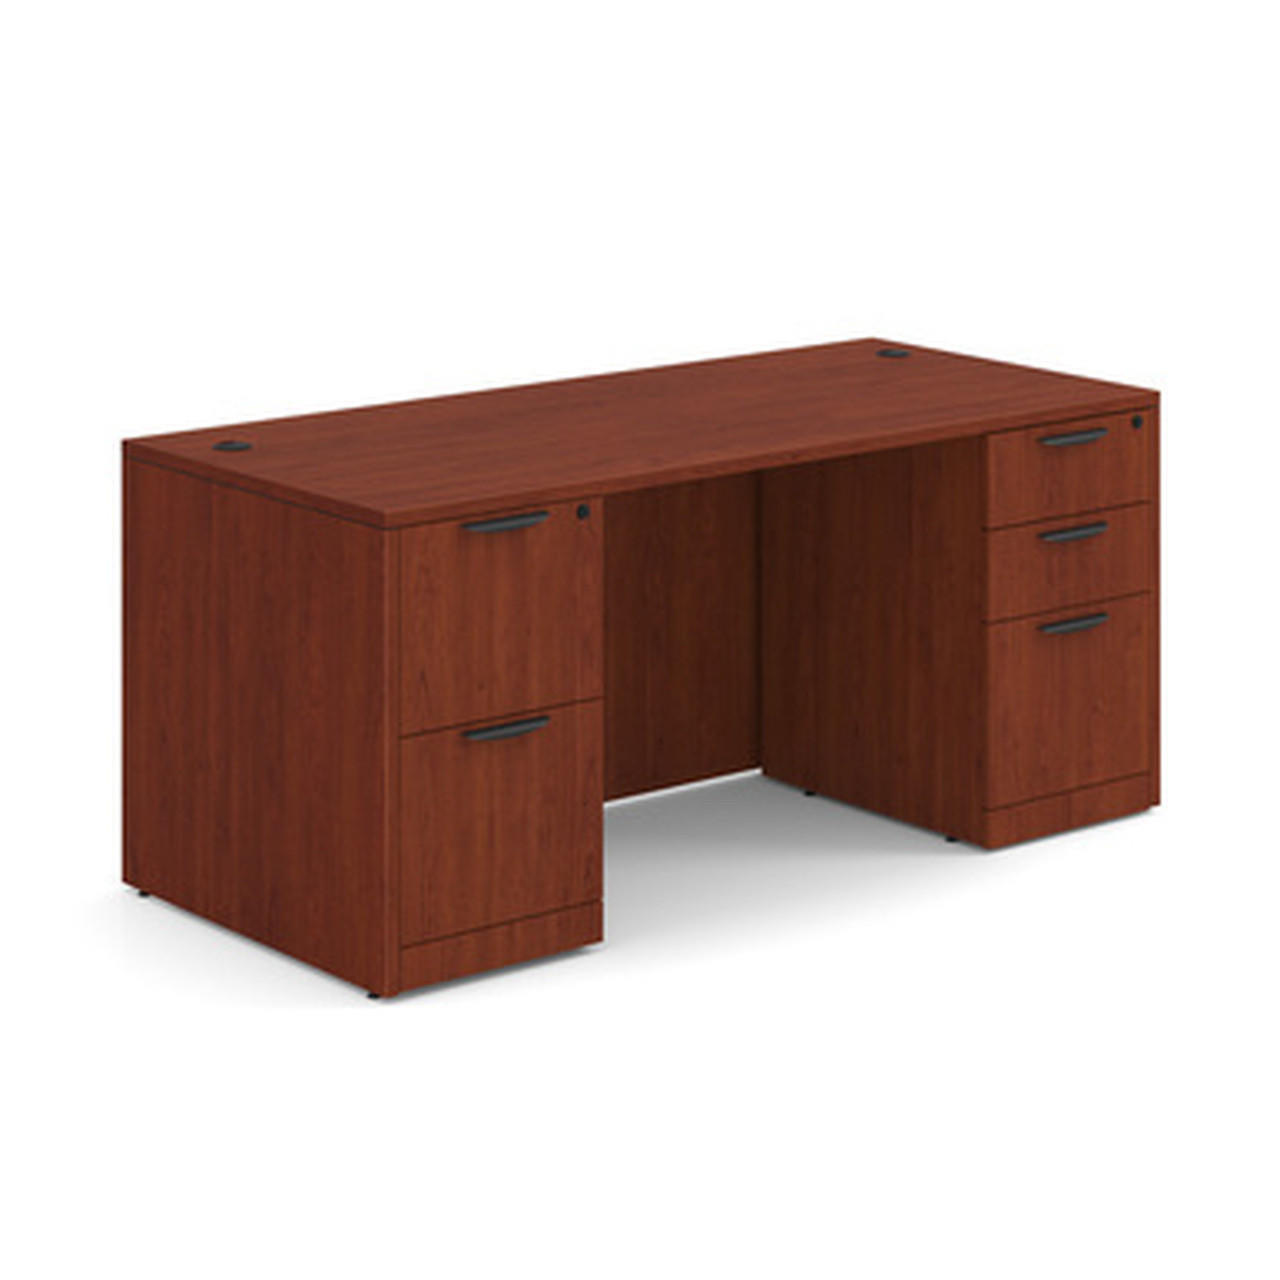  Office Source OS Laminate Collection 66" x 30" Double Pedestal Desk DBLFDPL102 